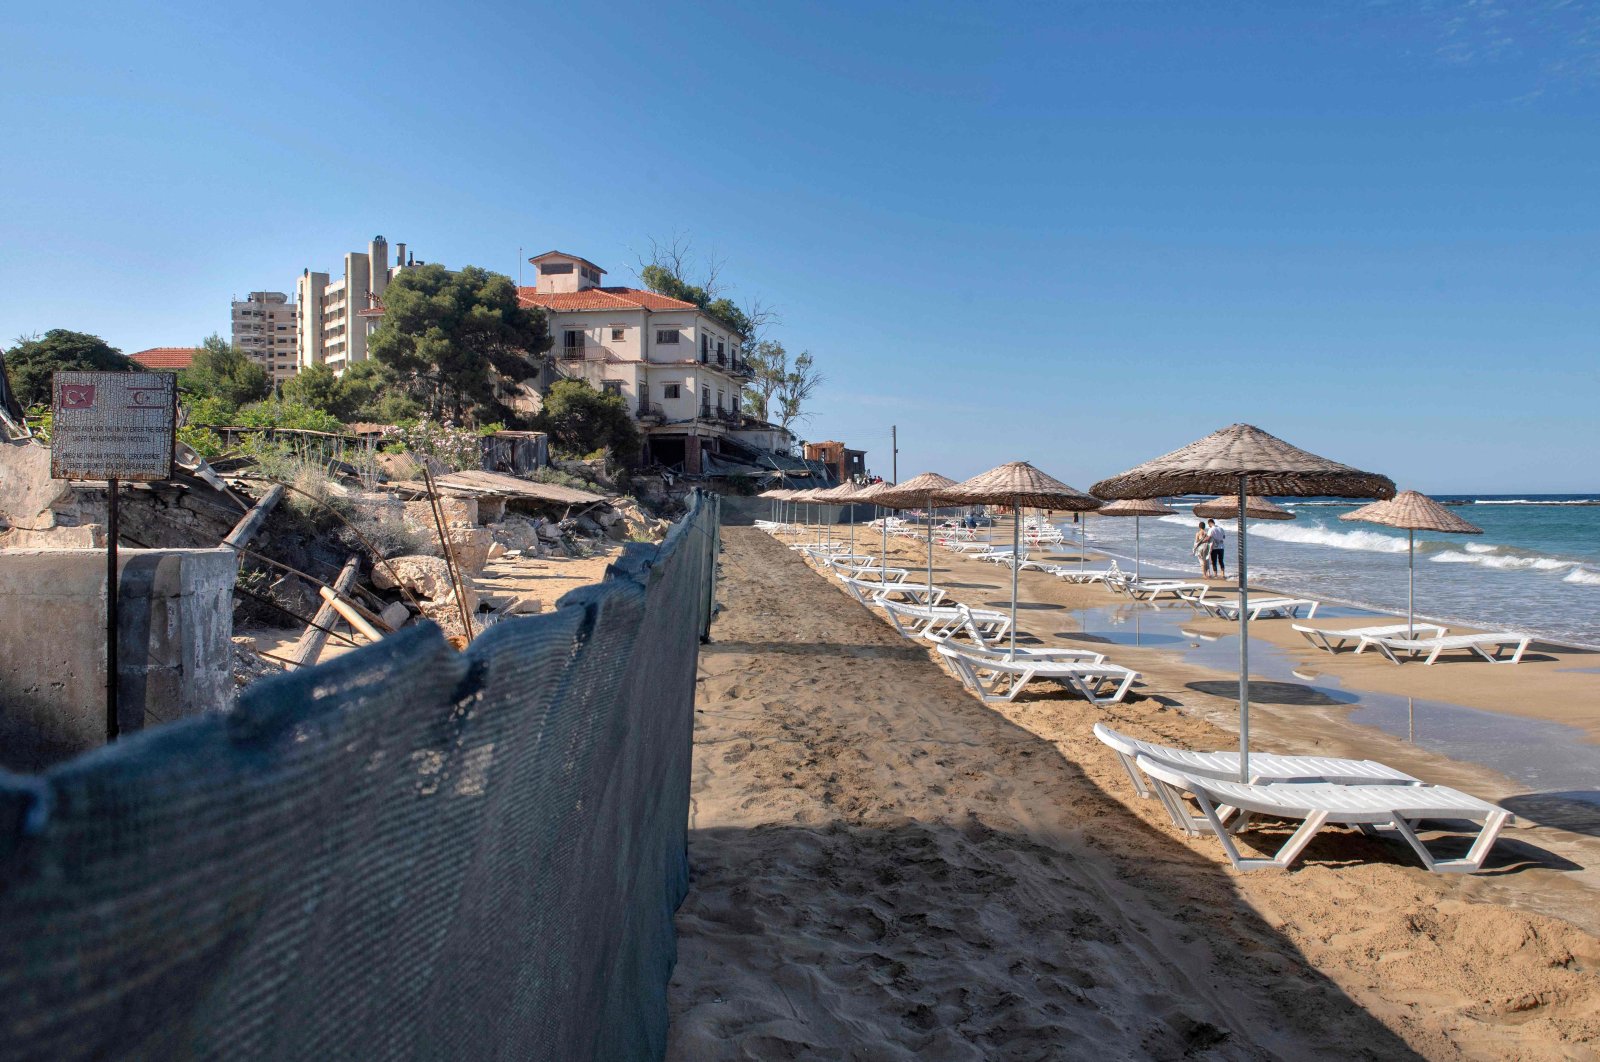 Sunbeds set up on a newly opened beach in the fenced-off area of Varosha, Turkish Republic of Northern Cyprus, May 21, 2022. (AFP Photo)